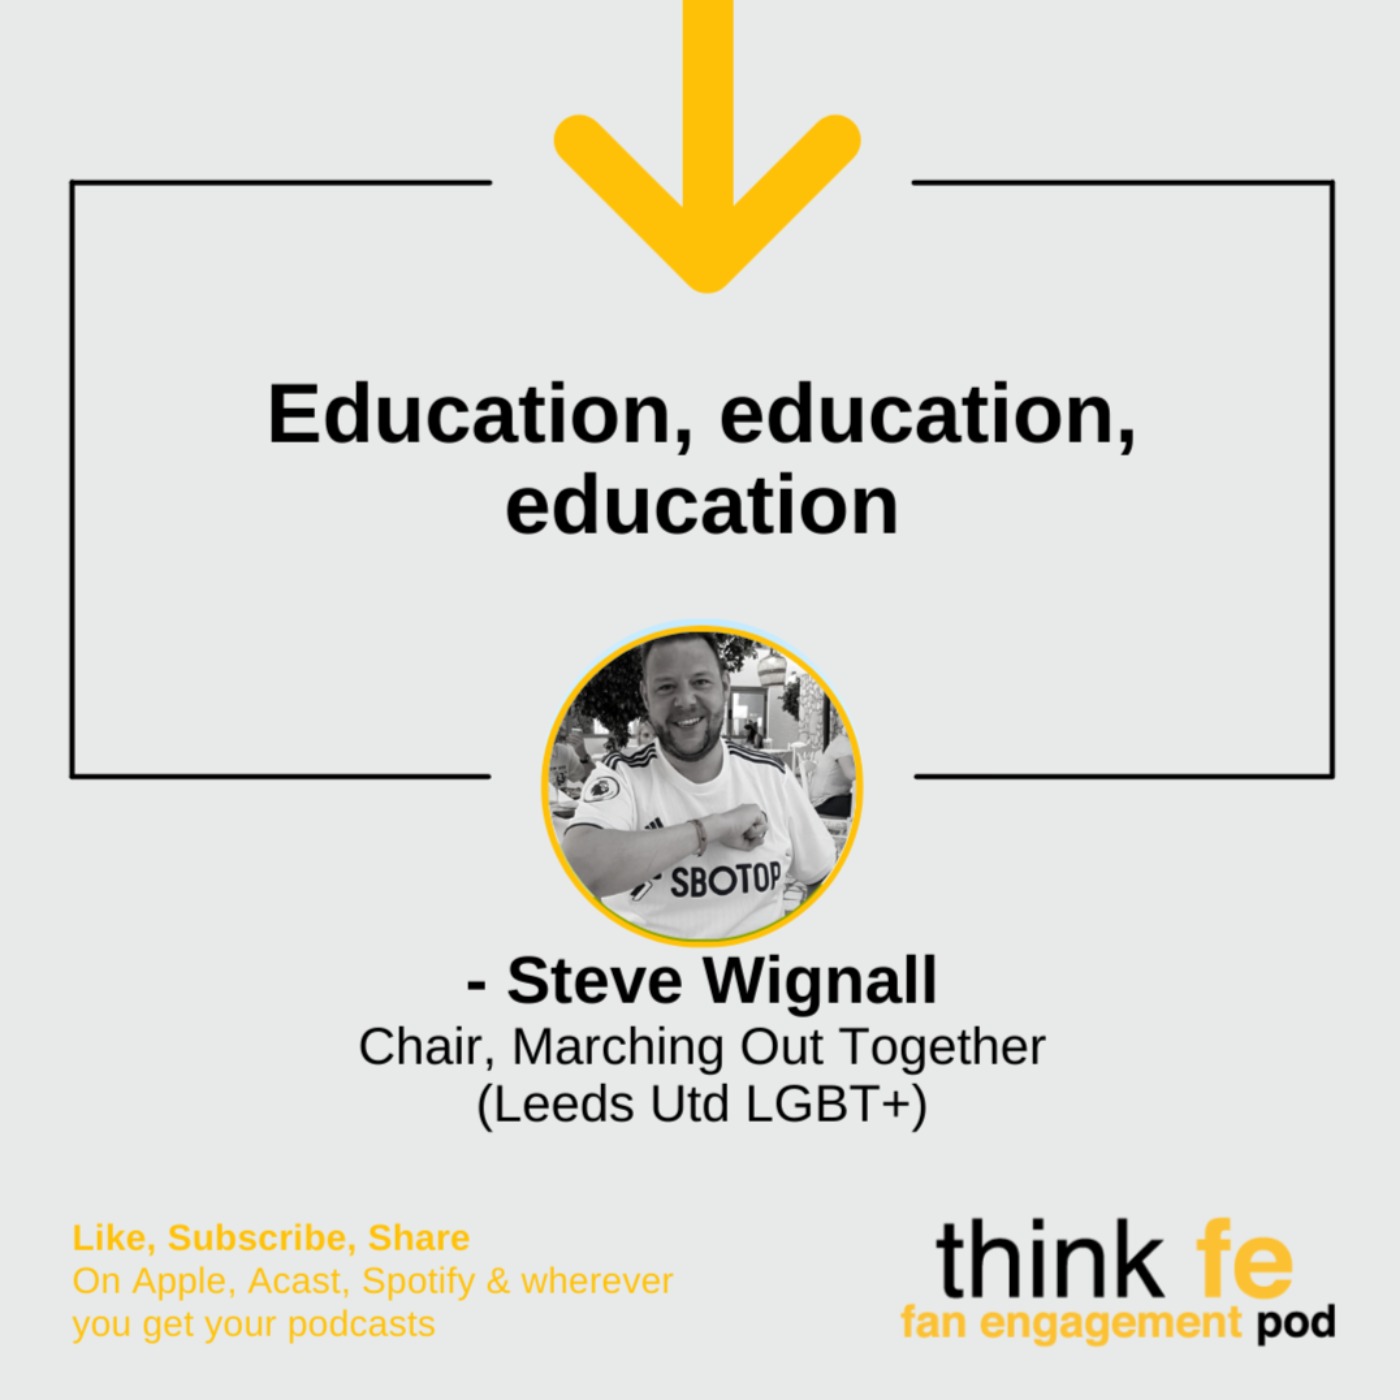 Education, education, education: Steve Wignall, Marching Out Together